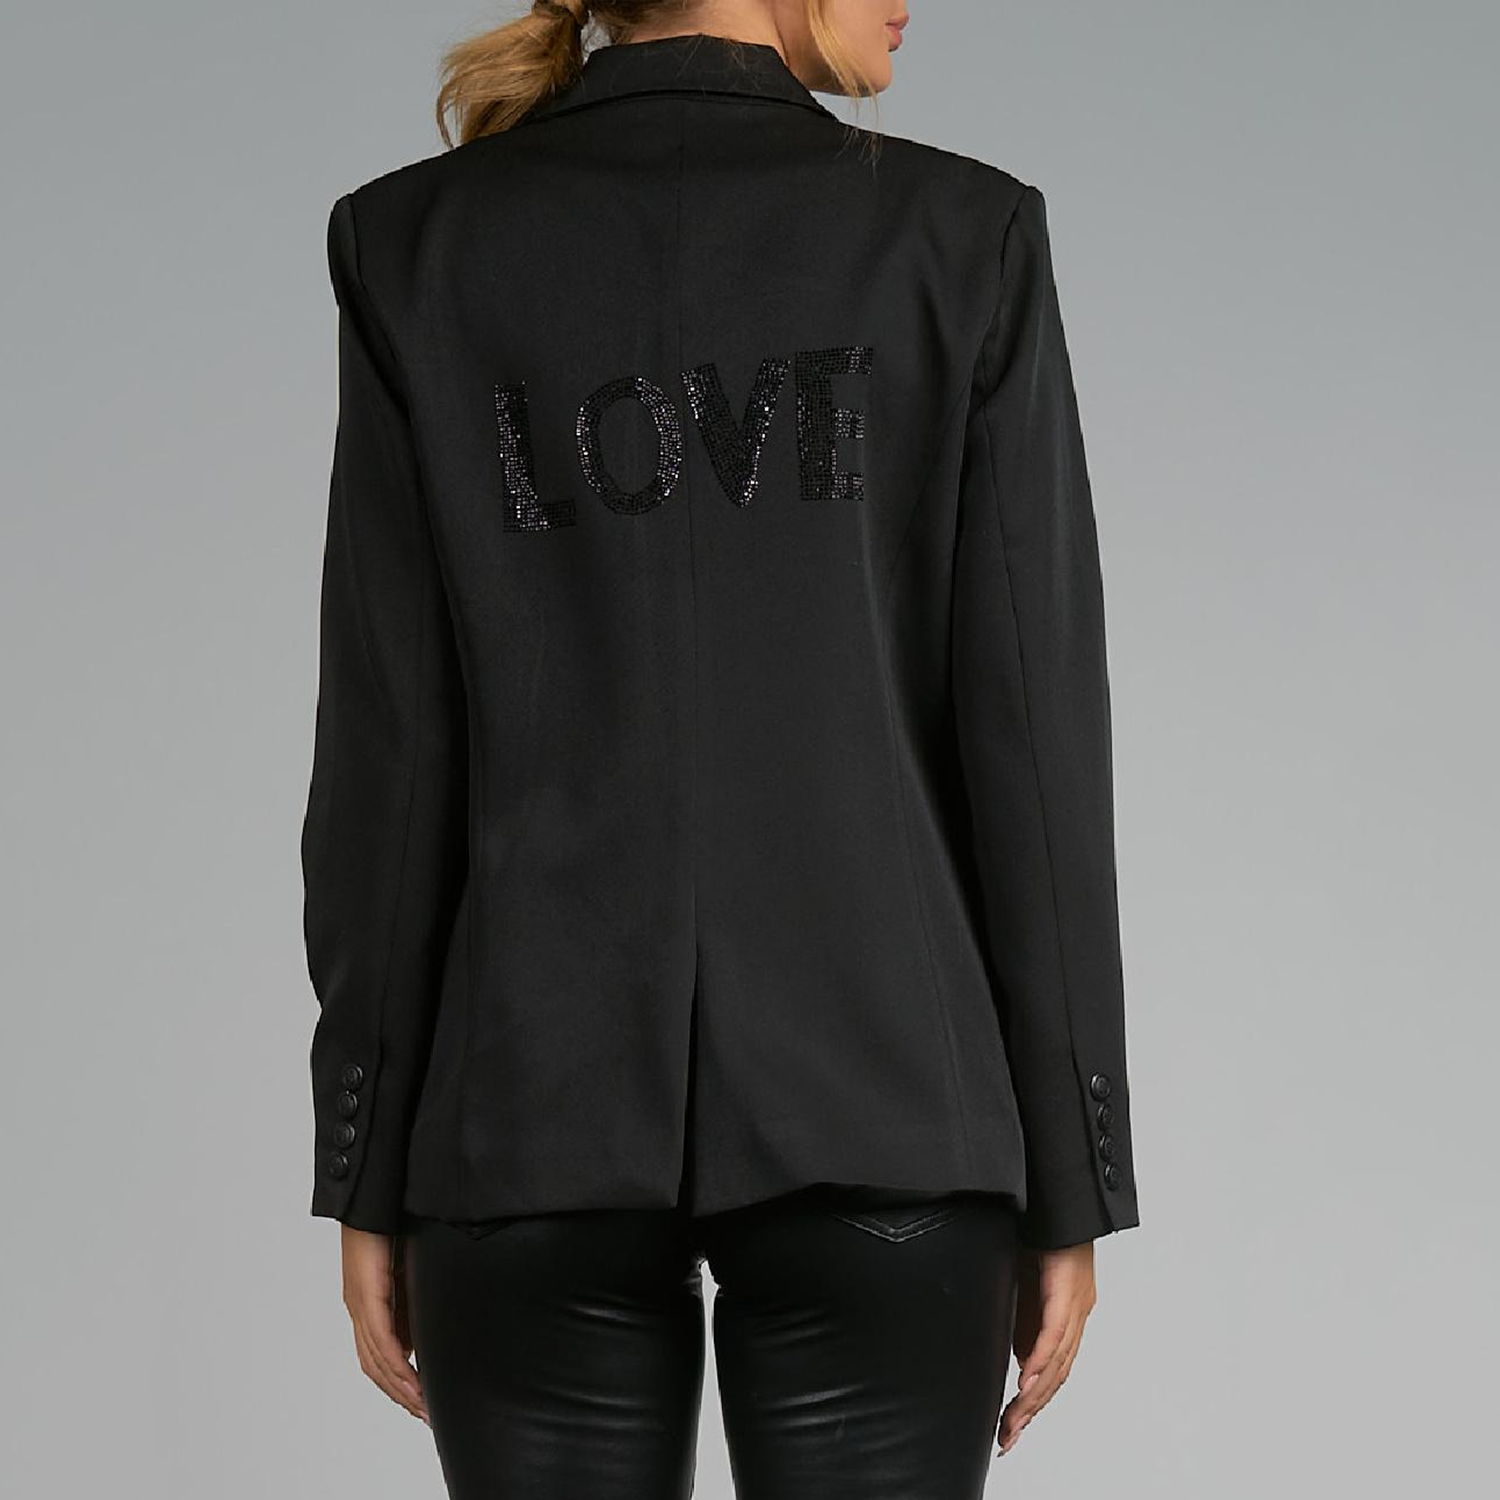 Elan Rhinestone Love Blazer. Make your casual days a bit more stylish with this layer ready blazer. Structured shoulders and a trim silhouette make this perfect for work or weekending. Best of all, the word "Love" is stoned onto the back for a dash of fun